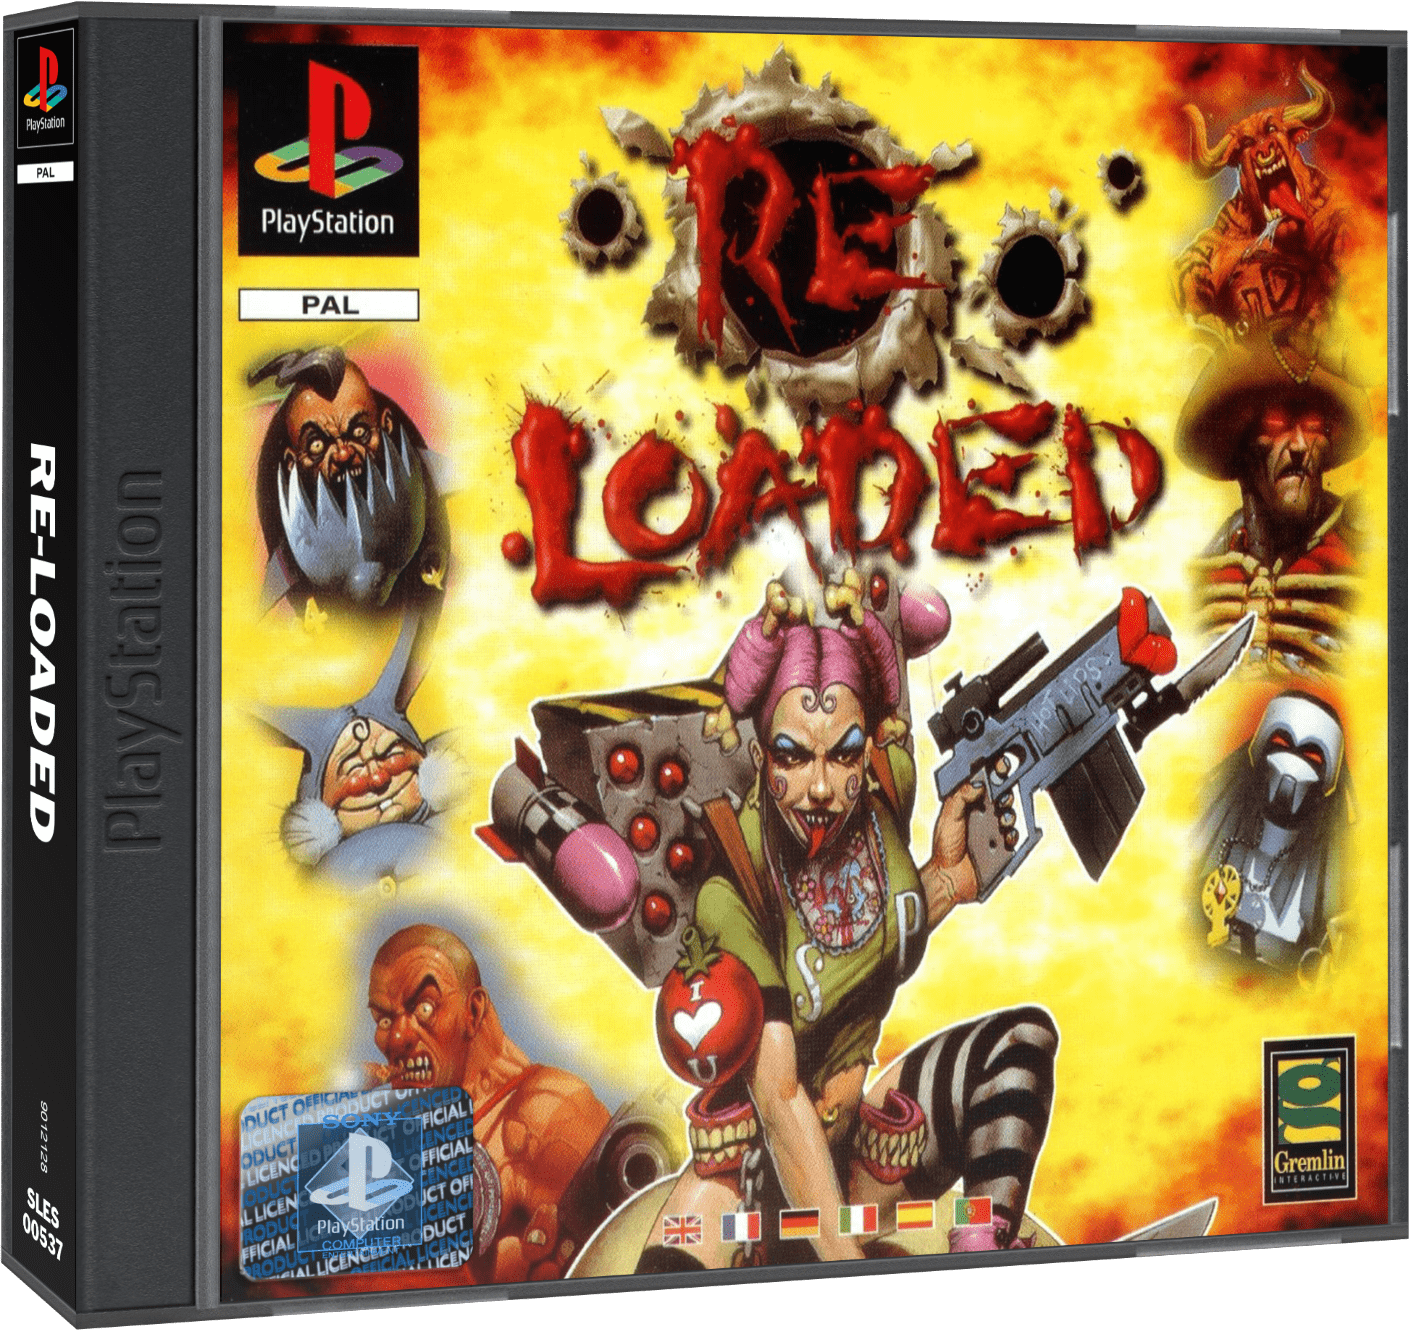 Re-Loaded : The Hardcore Sequel [USA] - Playstation (PSX/PS1) iso